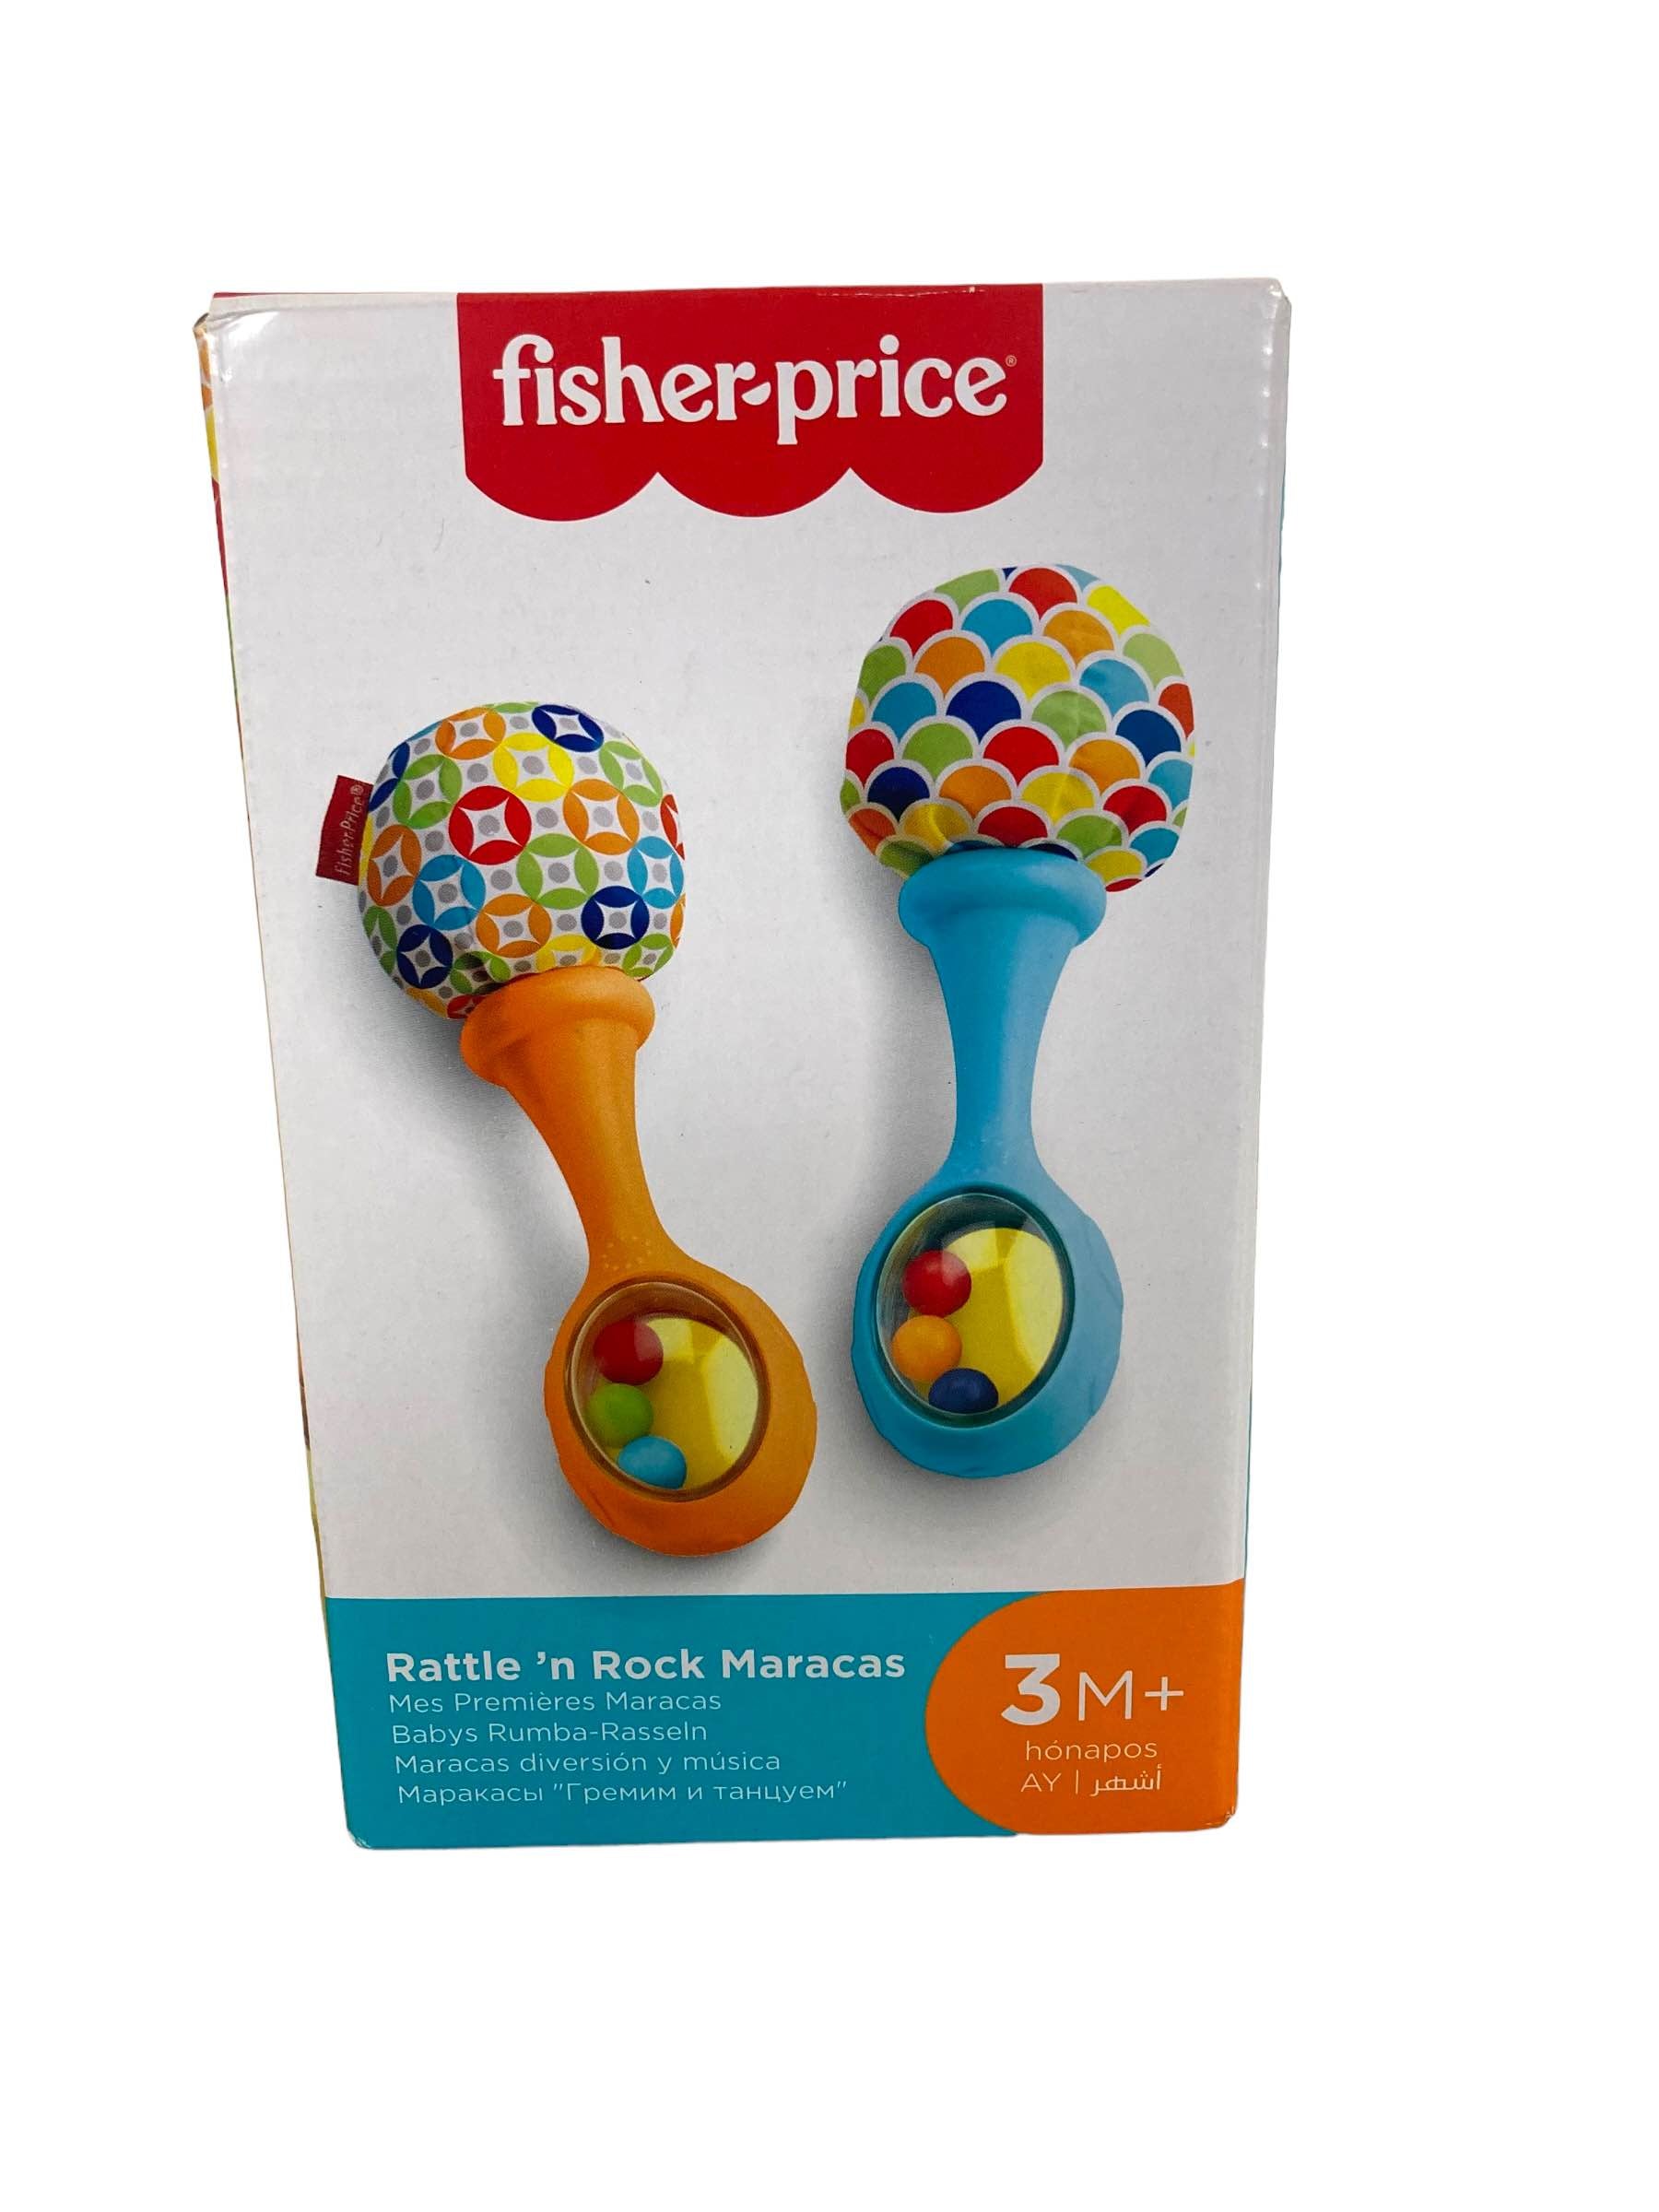 Fisher Price Rattle N Rock Maracas Toy Green Orange Ages 3M+ NEW